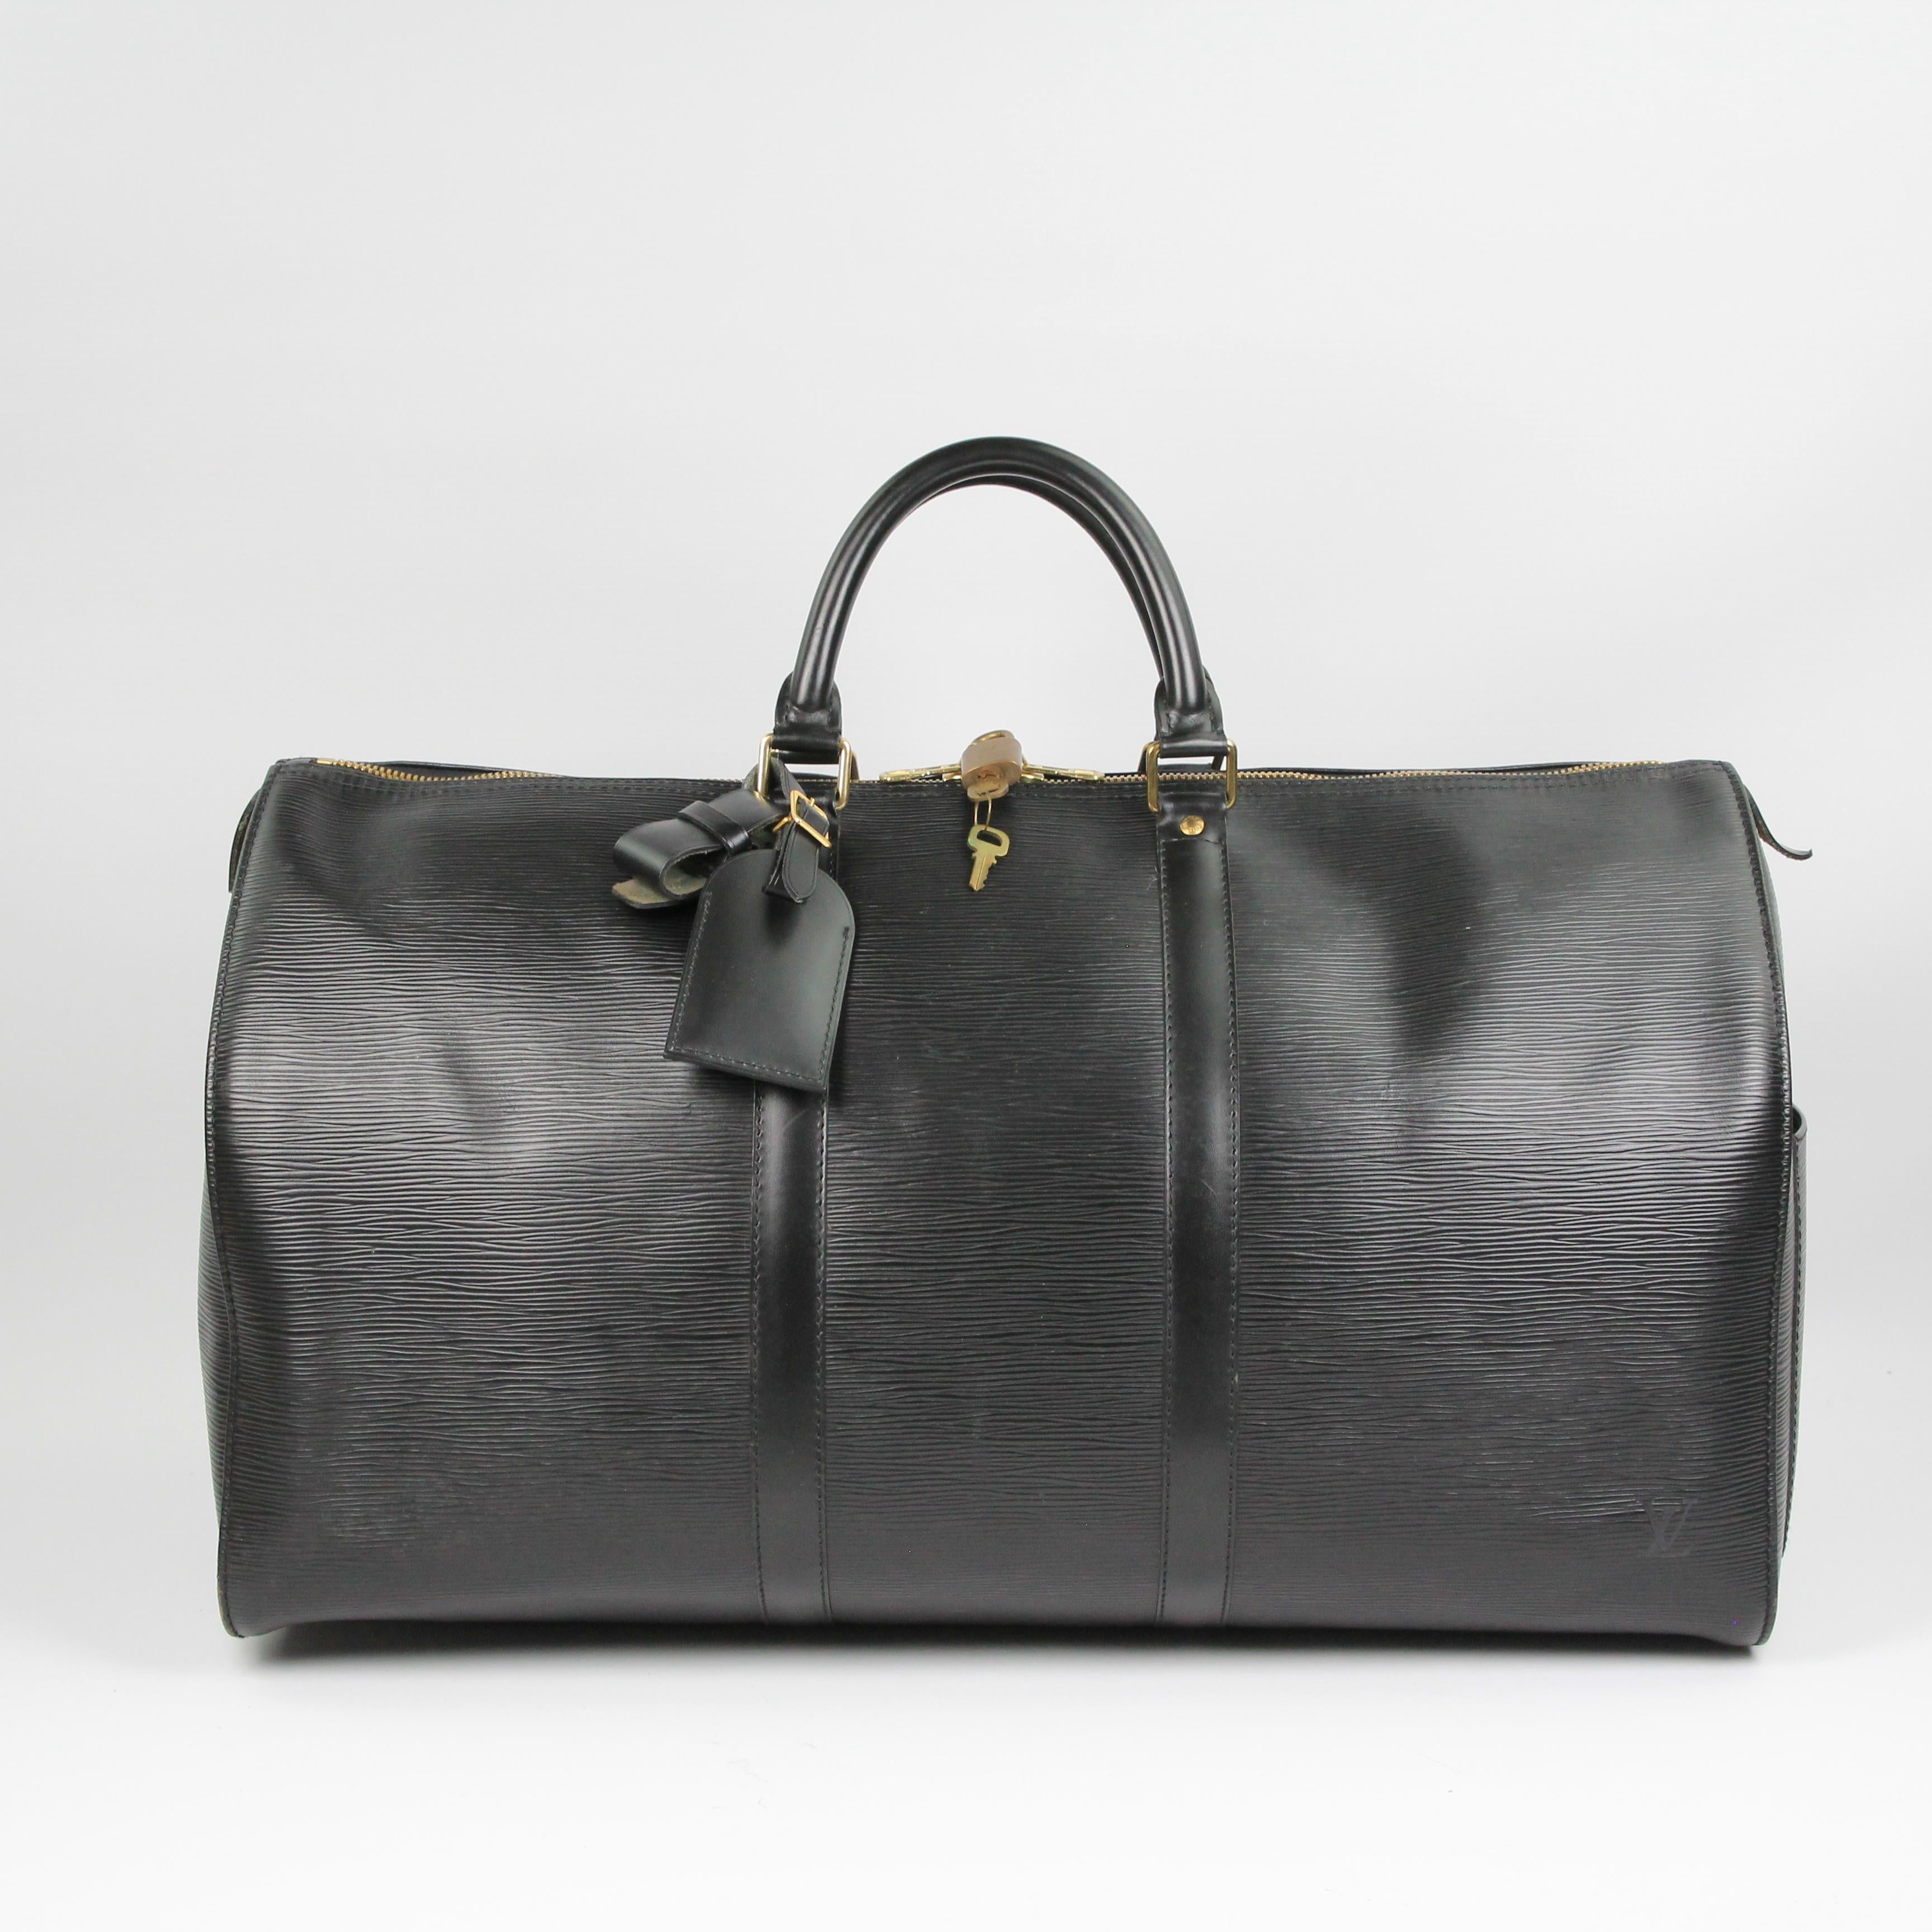 Louis Vuitton Keepall 50 leather travel bag In Good Condition For Sale In Rīga, LV